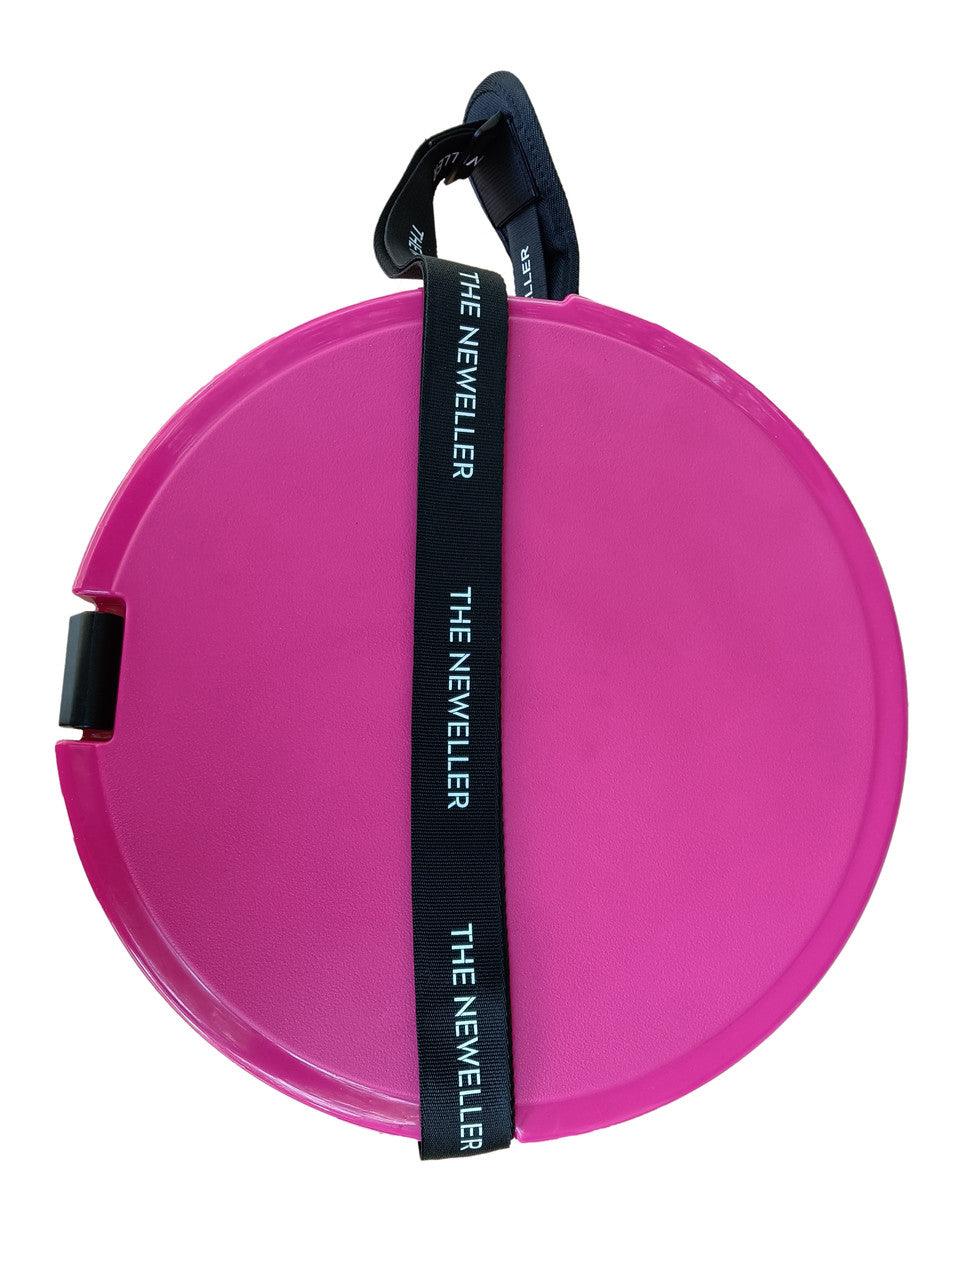 The Neweller Twelve in Hot Pink with a Strap - Newell Outdoors